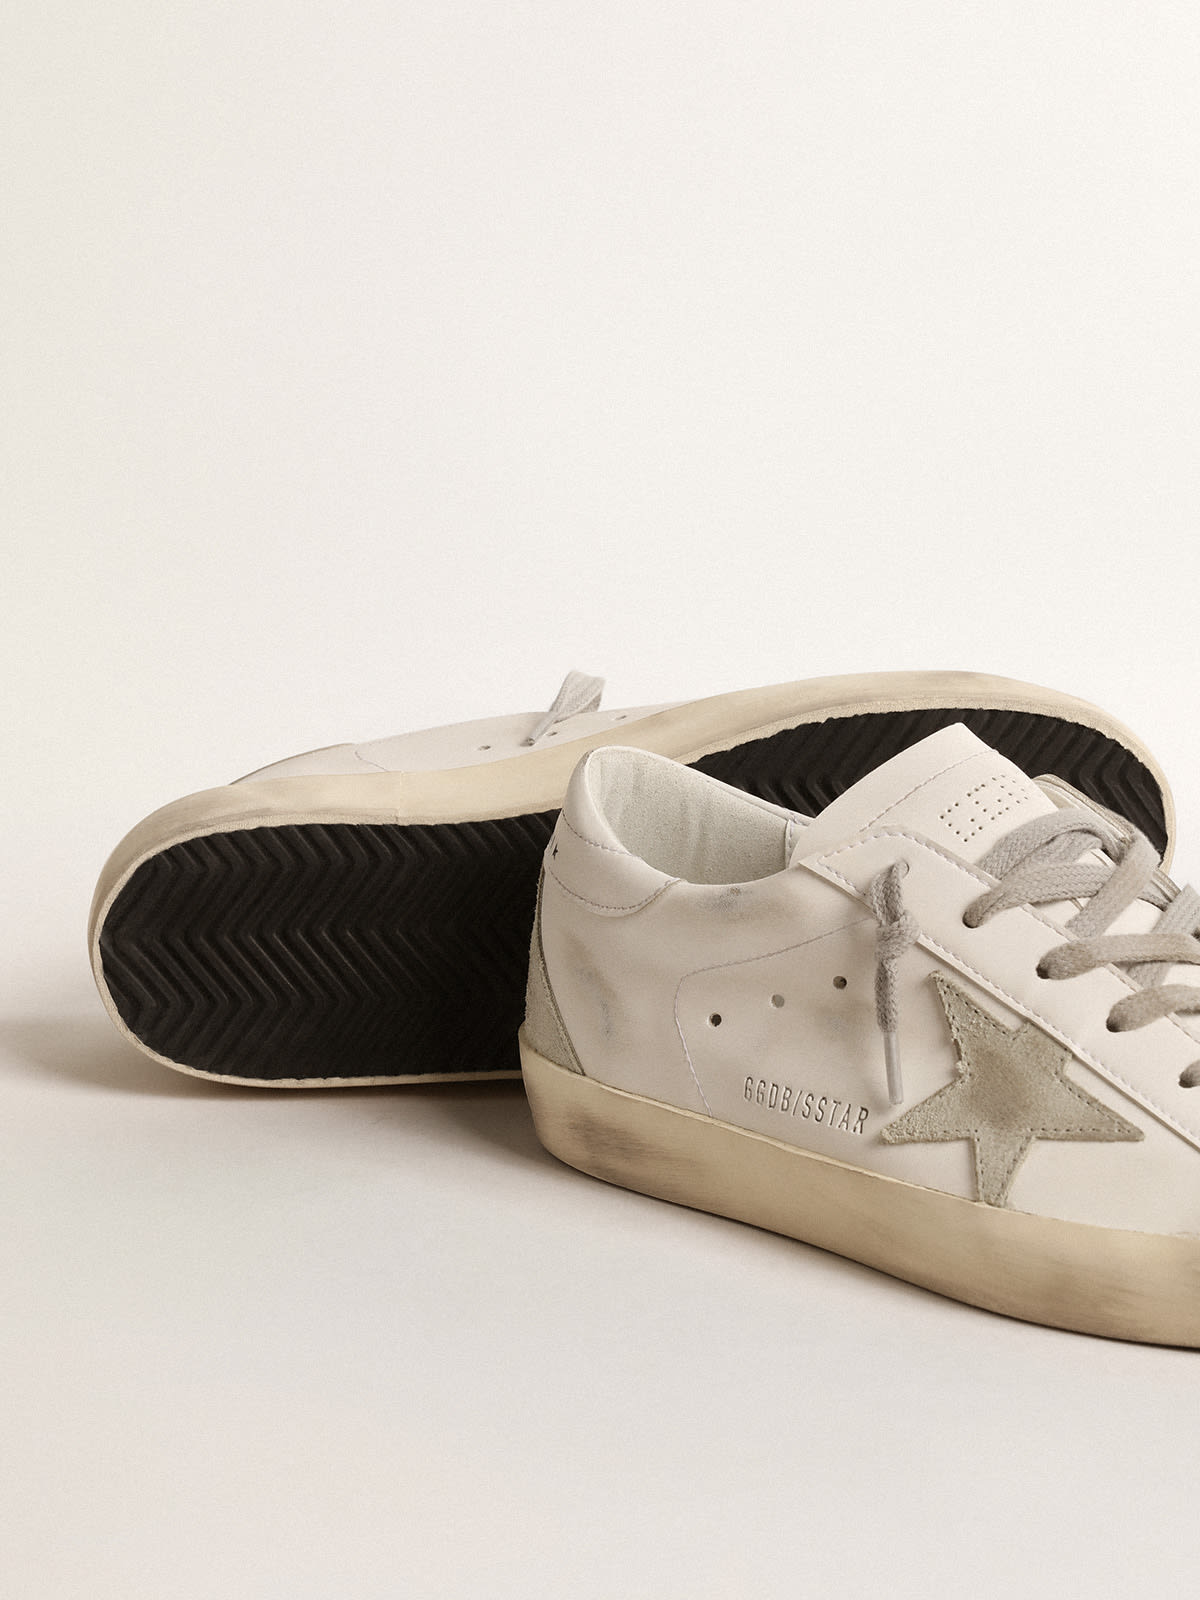 Golden Goose - Men’s bio-based Super-Star with ice-gray suede star in 